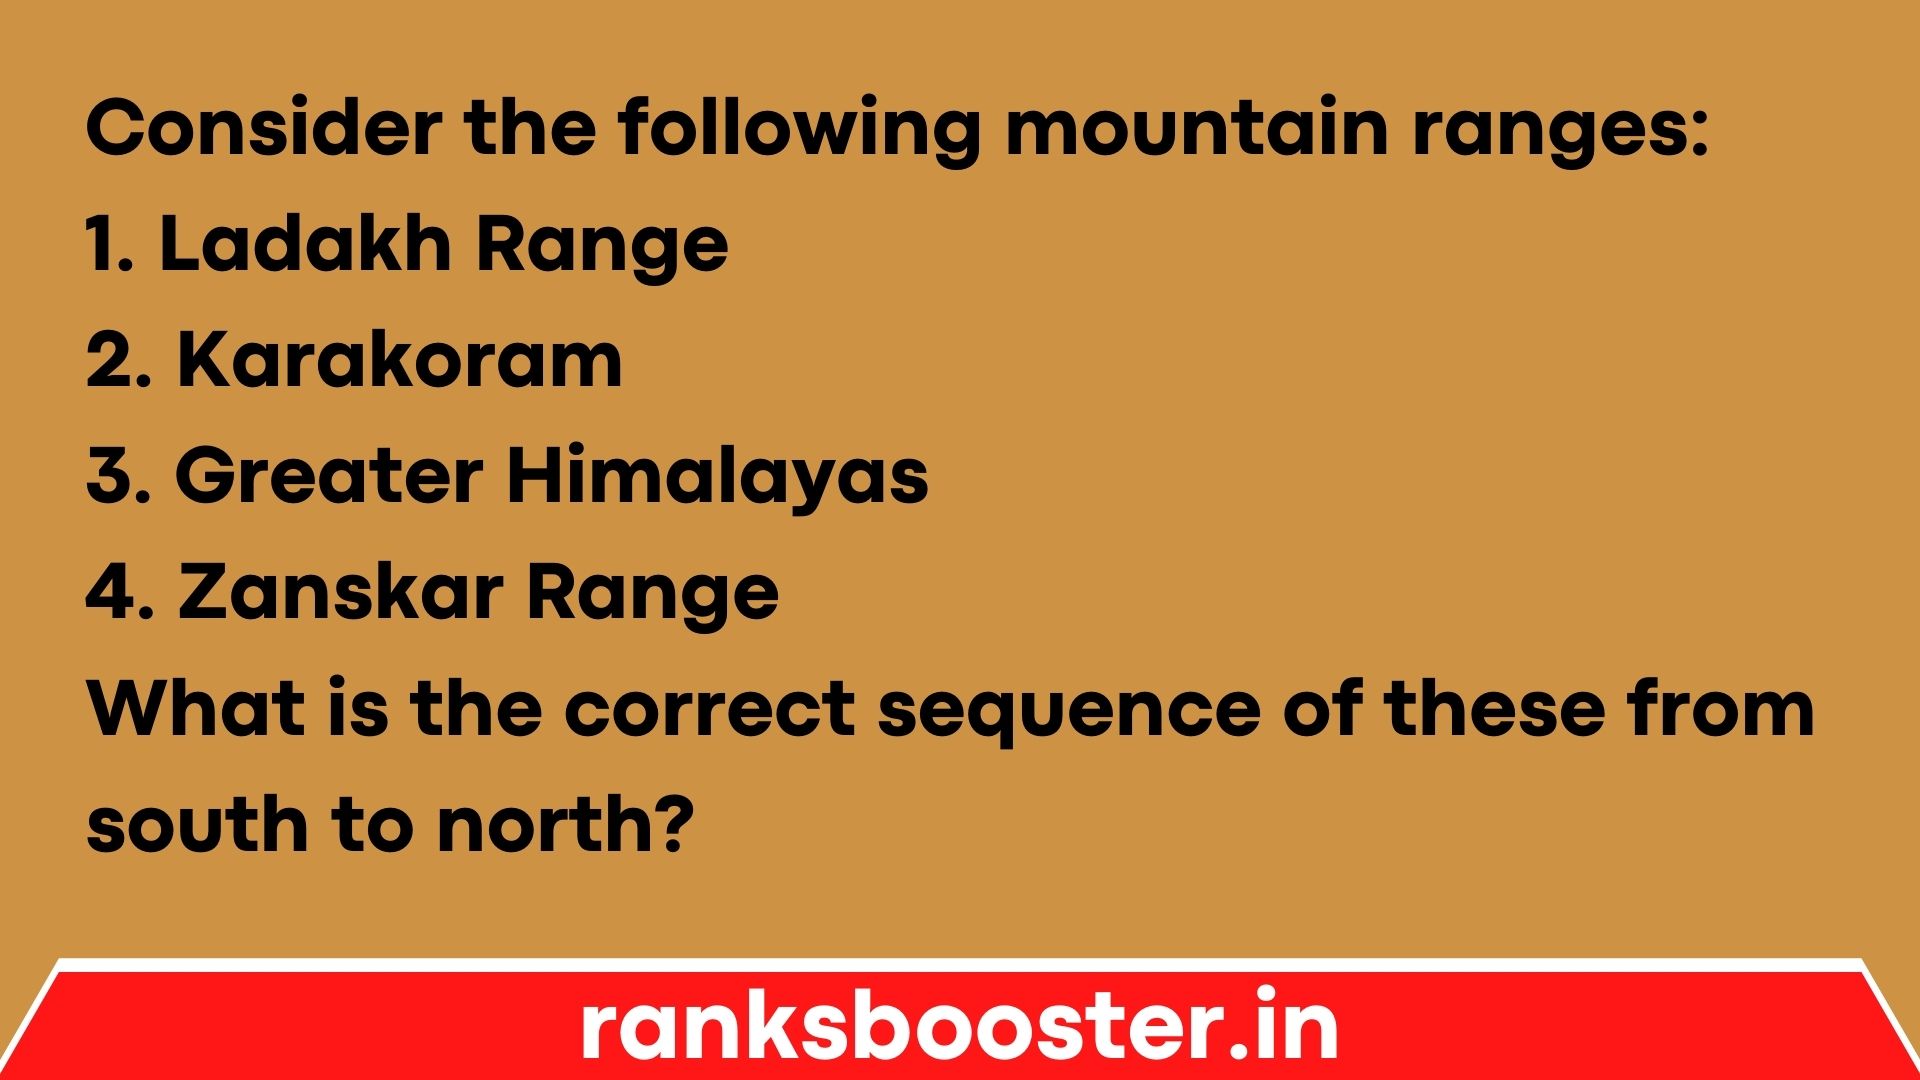 Consider the following mountain ranges: 1. Ladakh Range 2. Karakoram 3. Greater Himalayas 4. Zanskar Range What is the correct sequence of these from south to north?